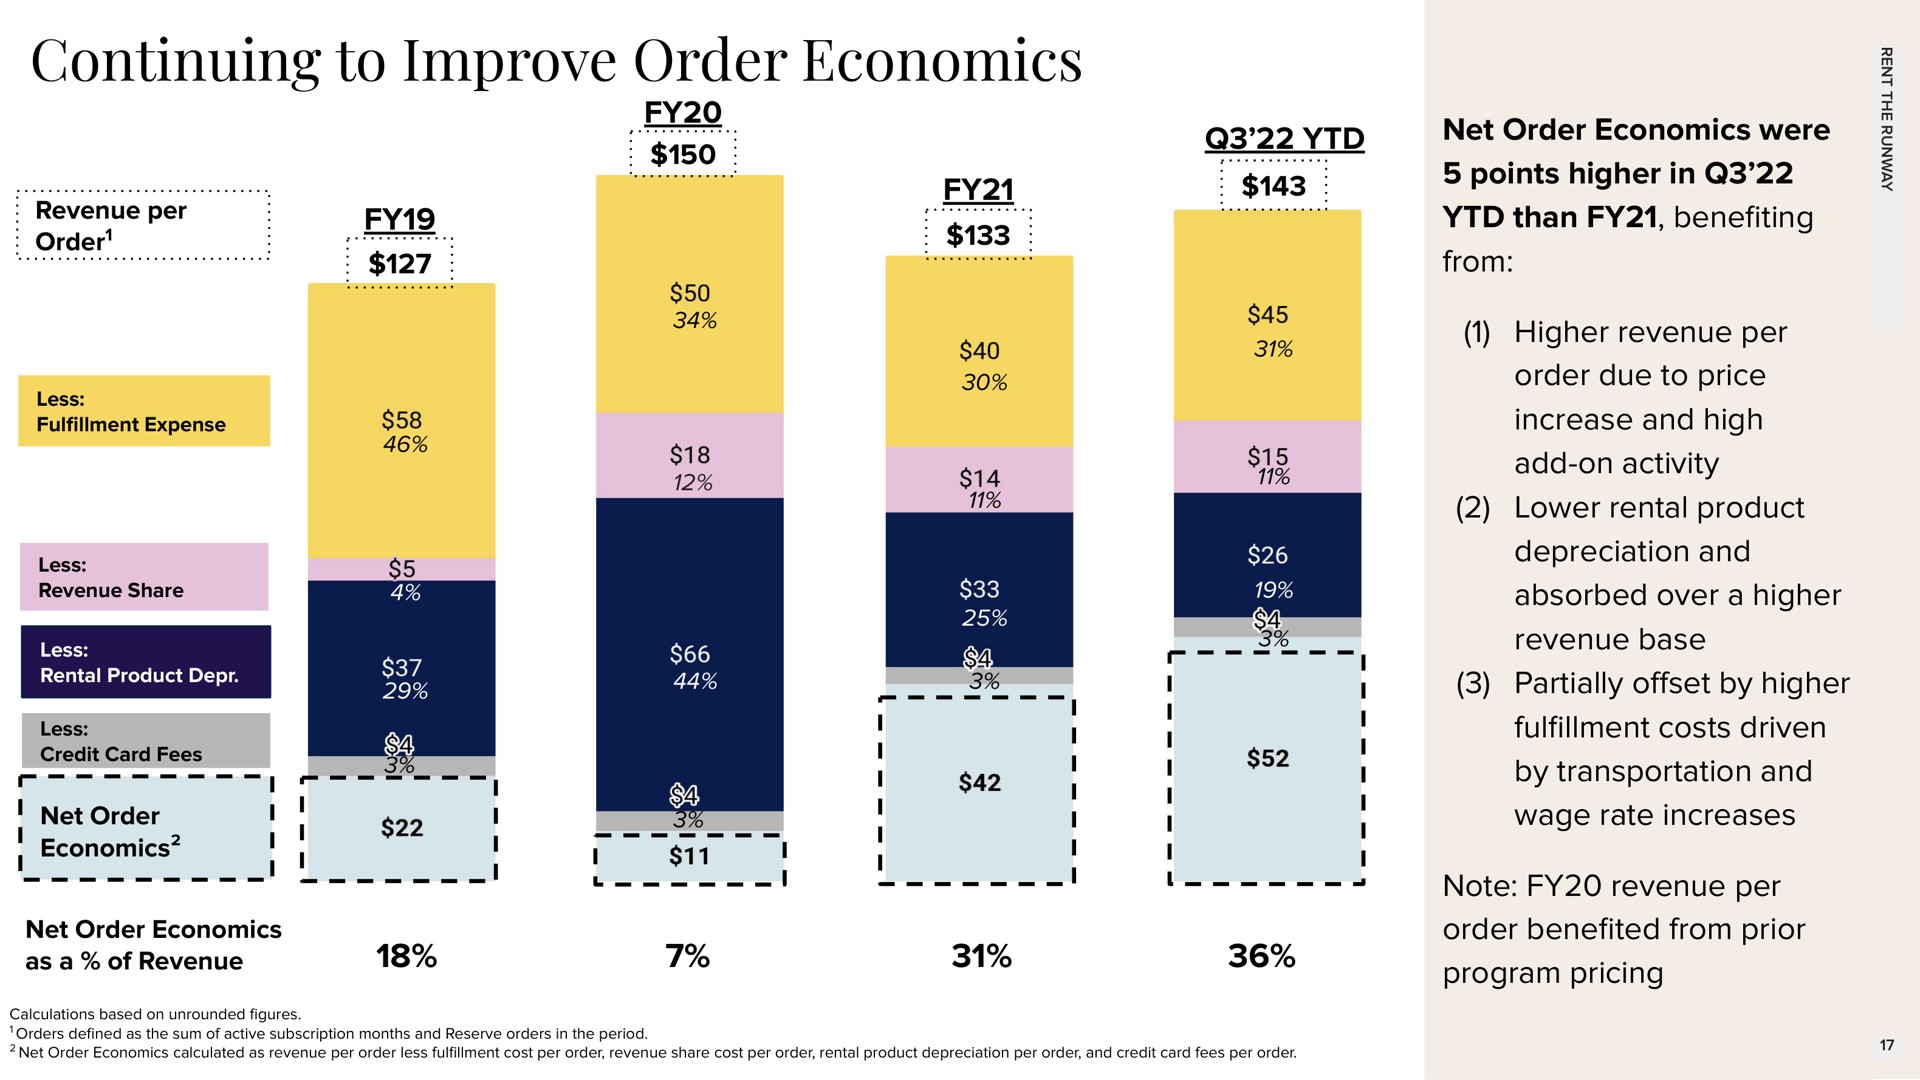 continuing to improve order economics net order economics were points higher in than bene ting from higher revenue per order due to price increase and high add on activity lower rental product depreciation and absorbed over a higher revenue base partially set by higher costs driven by transportation and wage rate increases note revenue per order bene ted from prior program pricing | Rent The Runway